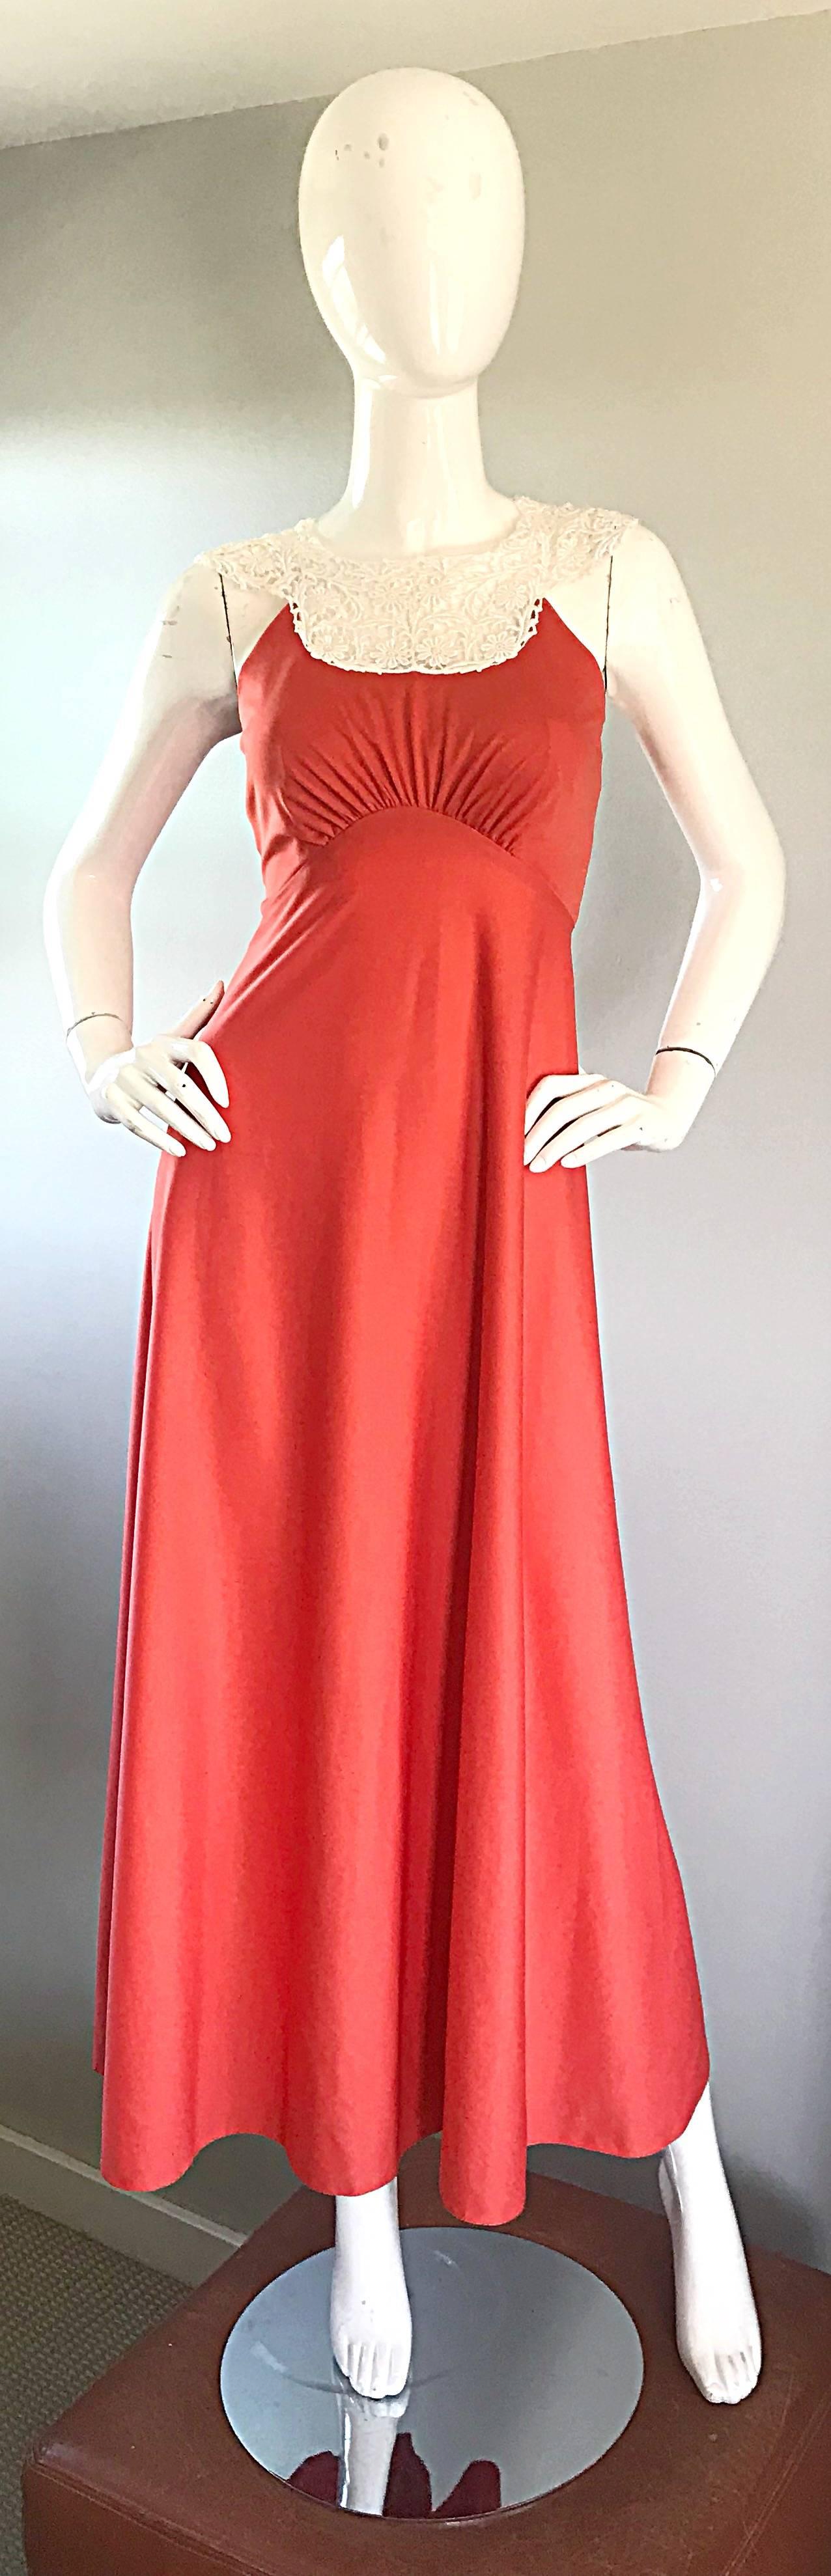 Striking coral / salmon pink jersey maxi dress! Hard to find color that compliments nearly any skin tone! Slinky jersey looks fantastic when on. White crochet lace collar makes for a stark contrast. Hidden zipper up the back with hook-and-eye